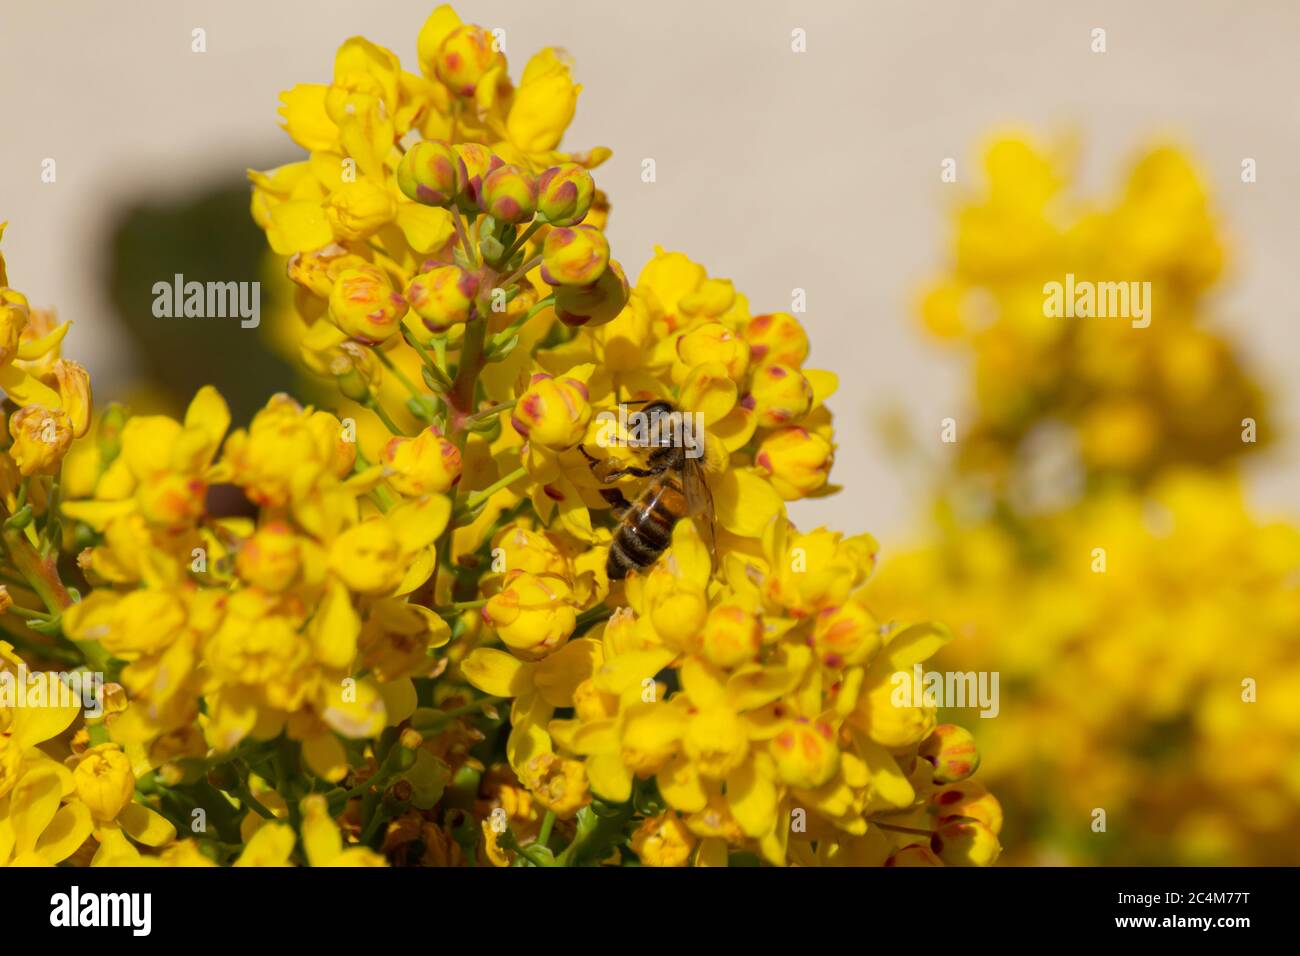 Close up of a honey bee sitting on the yellow flowers of a mahonia, Berberis aquifolium or Gewöhnliche Mahonie Stock Photo